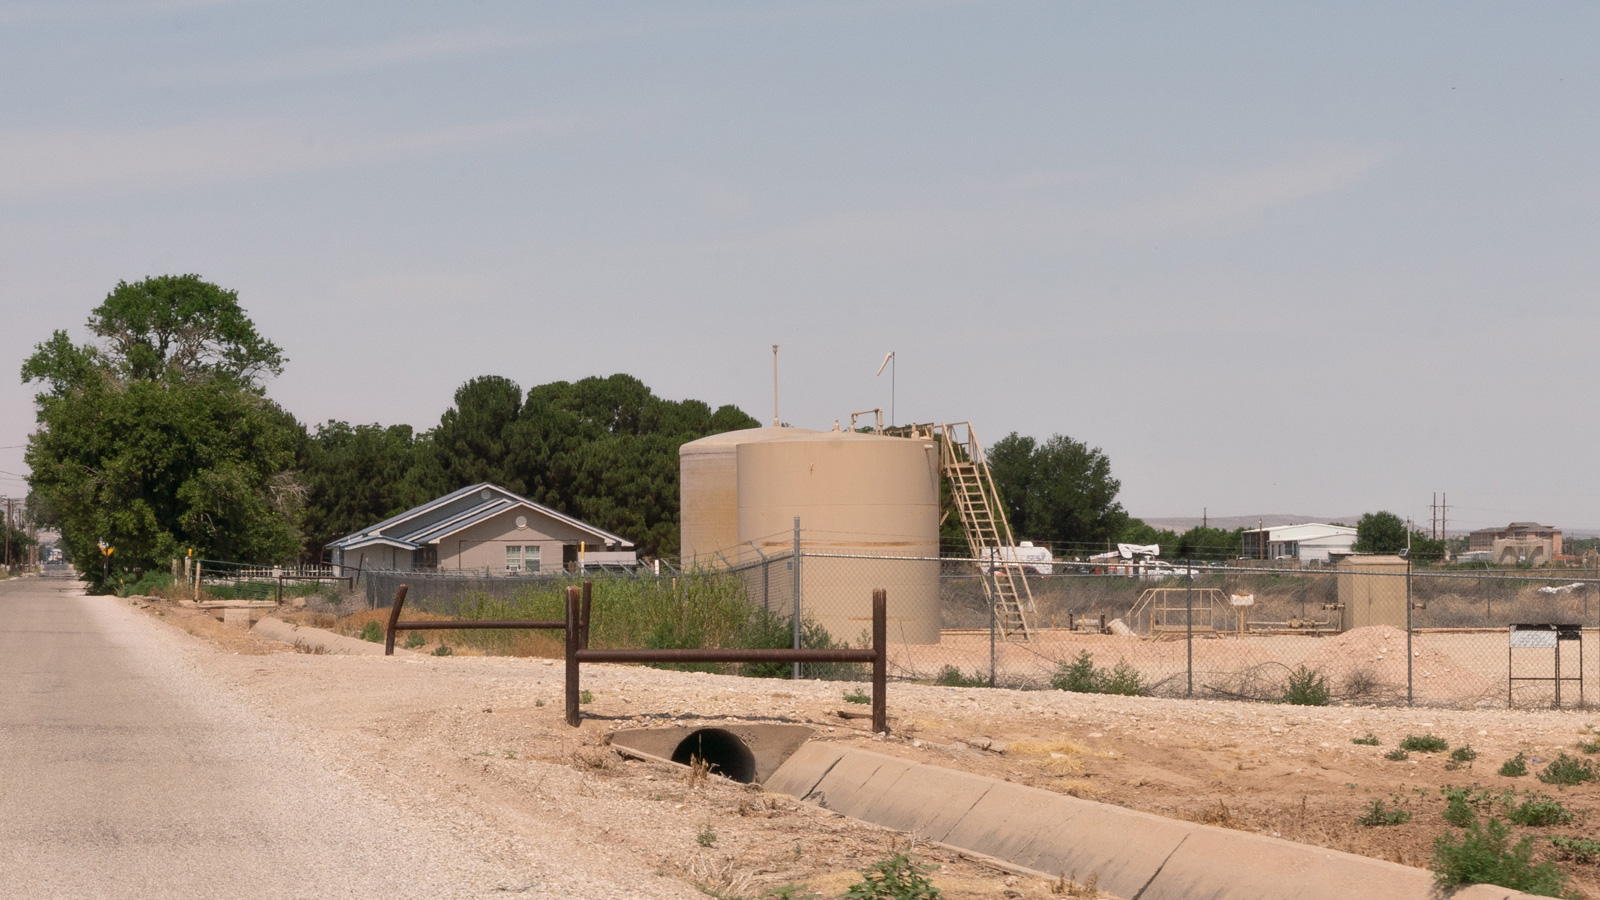 A home sits next to a well in the Permian Basin in southeastern New Mexico.